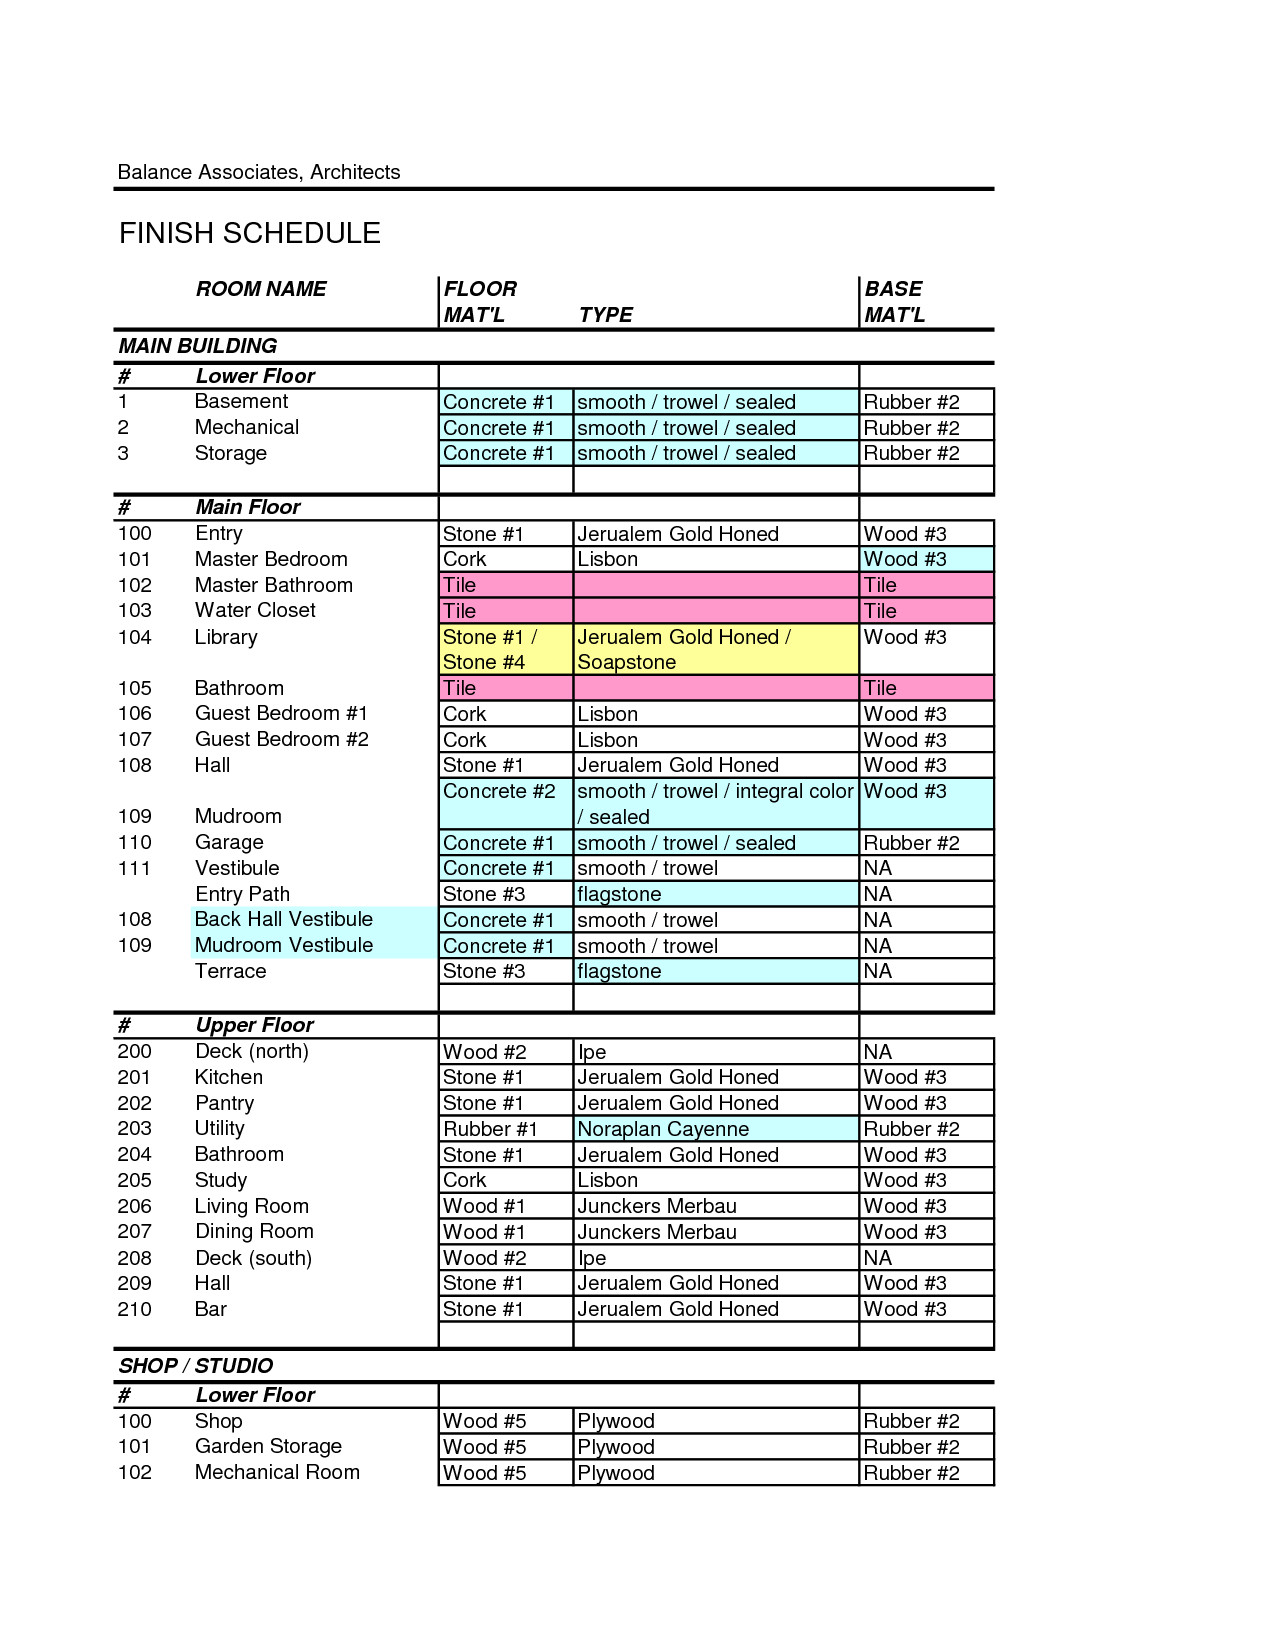 Construction Finish Schedule Template Room Finish Schedule Template Design